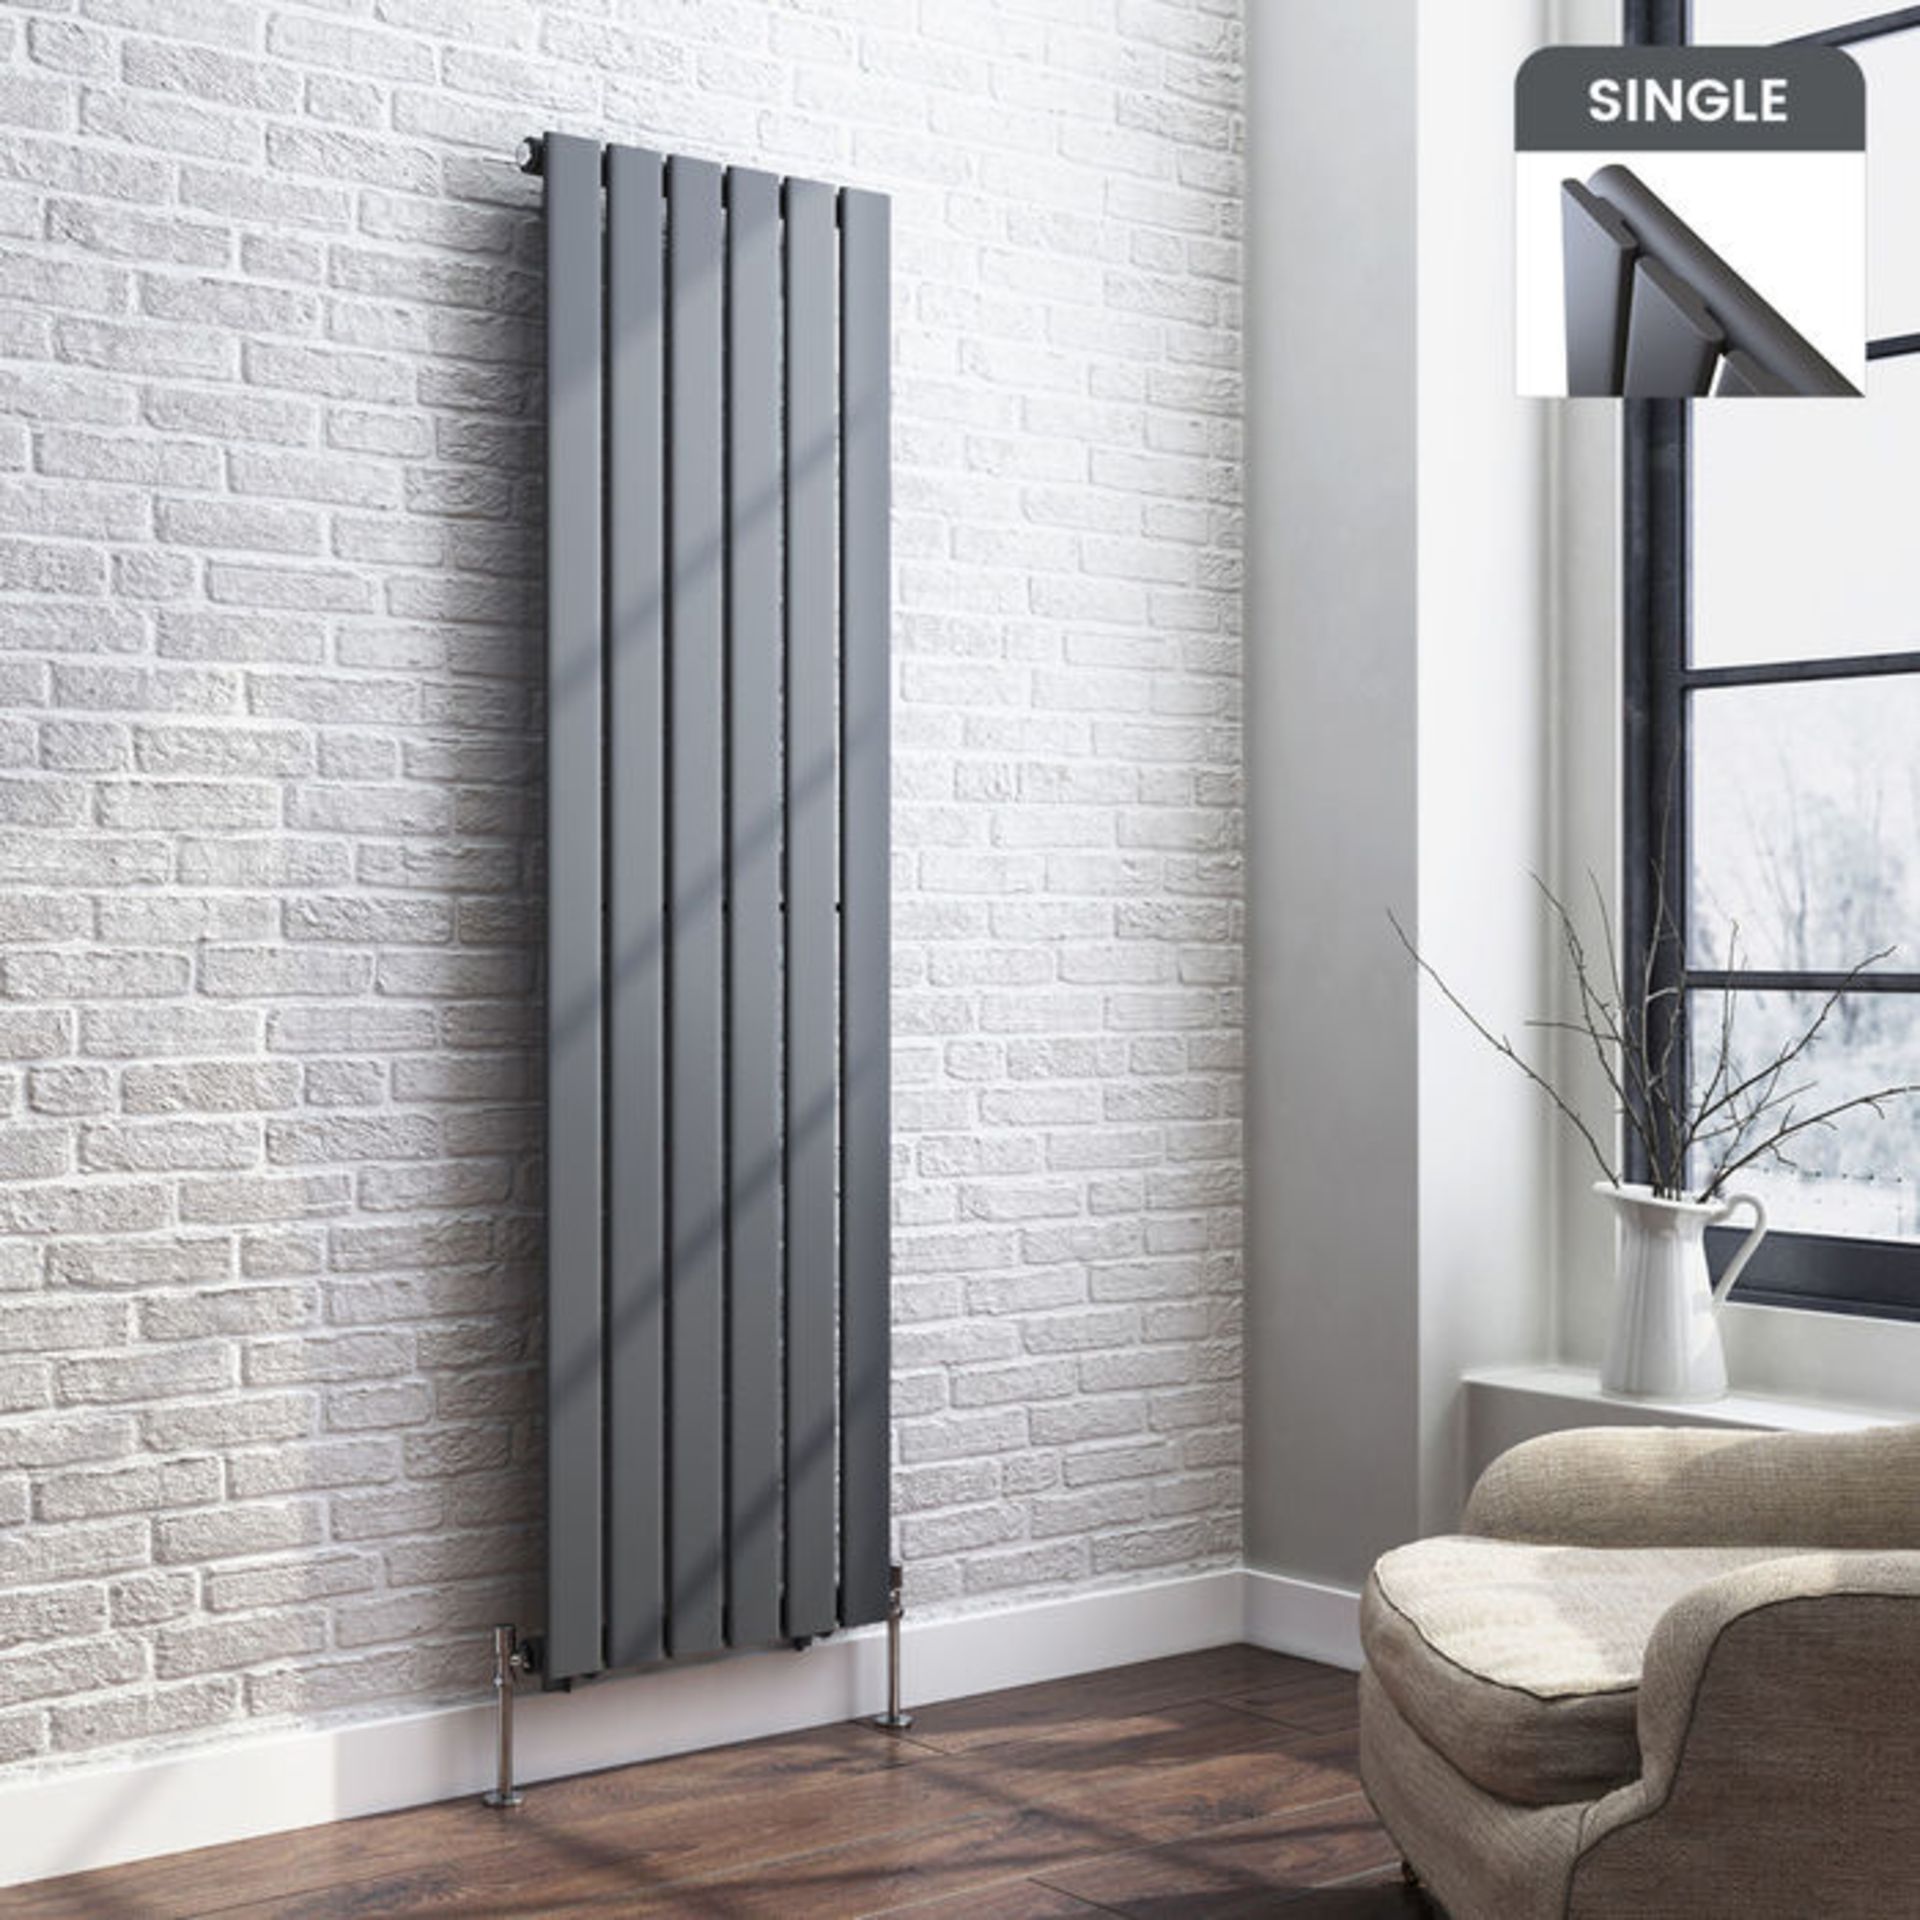 (PO132) 1600x452mm Anthracite Single Flat Panel Vertical Radiator. RRP £259.99.Made from low